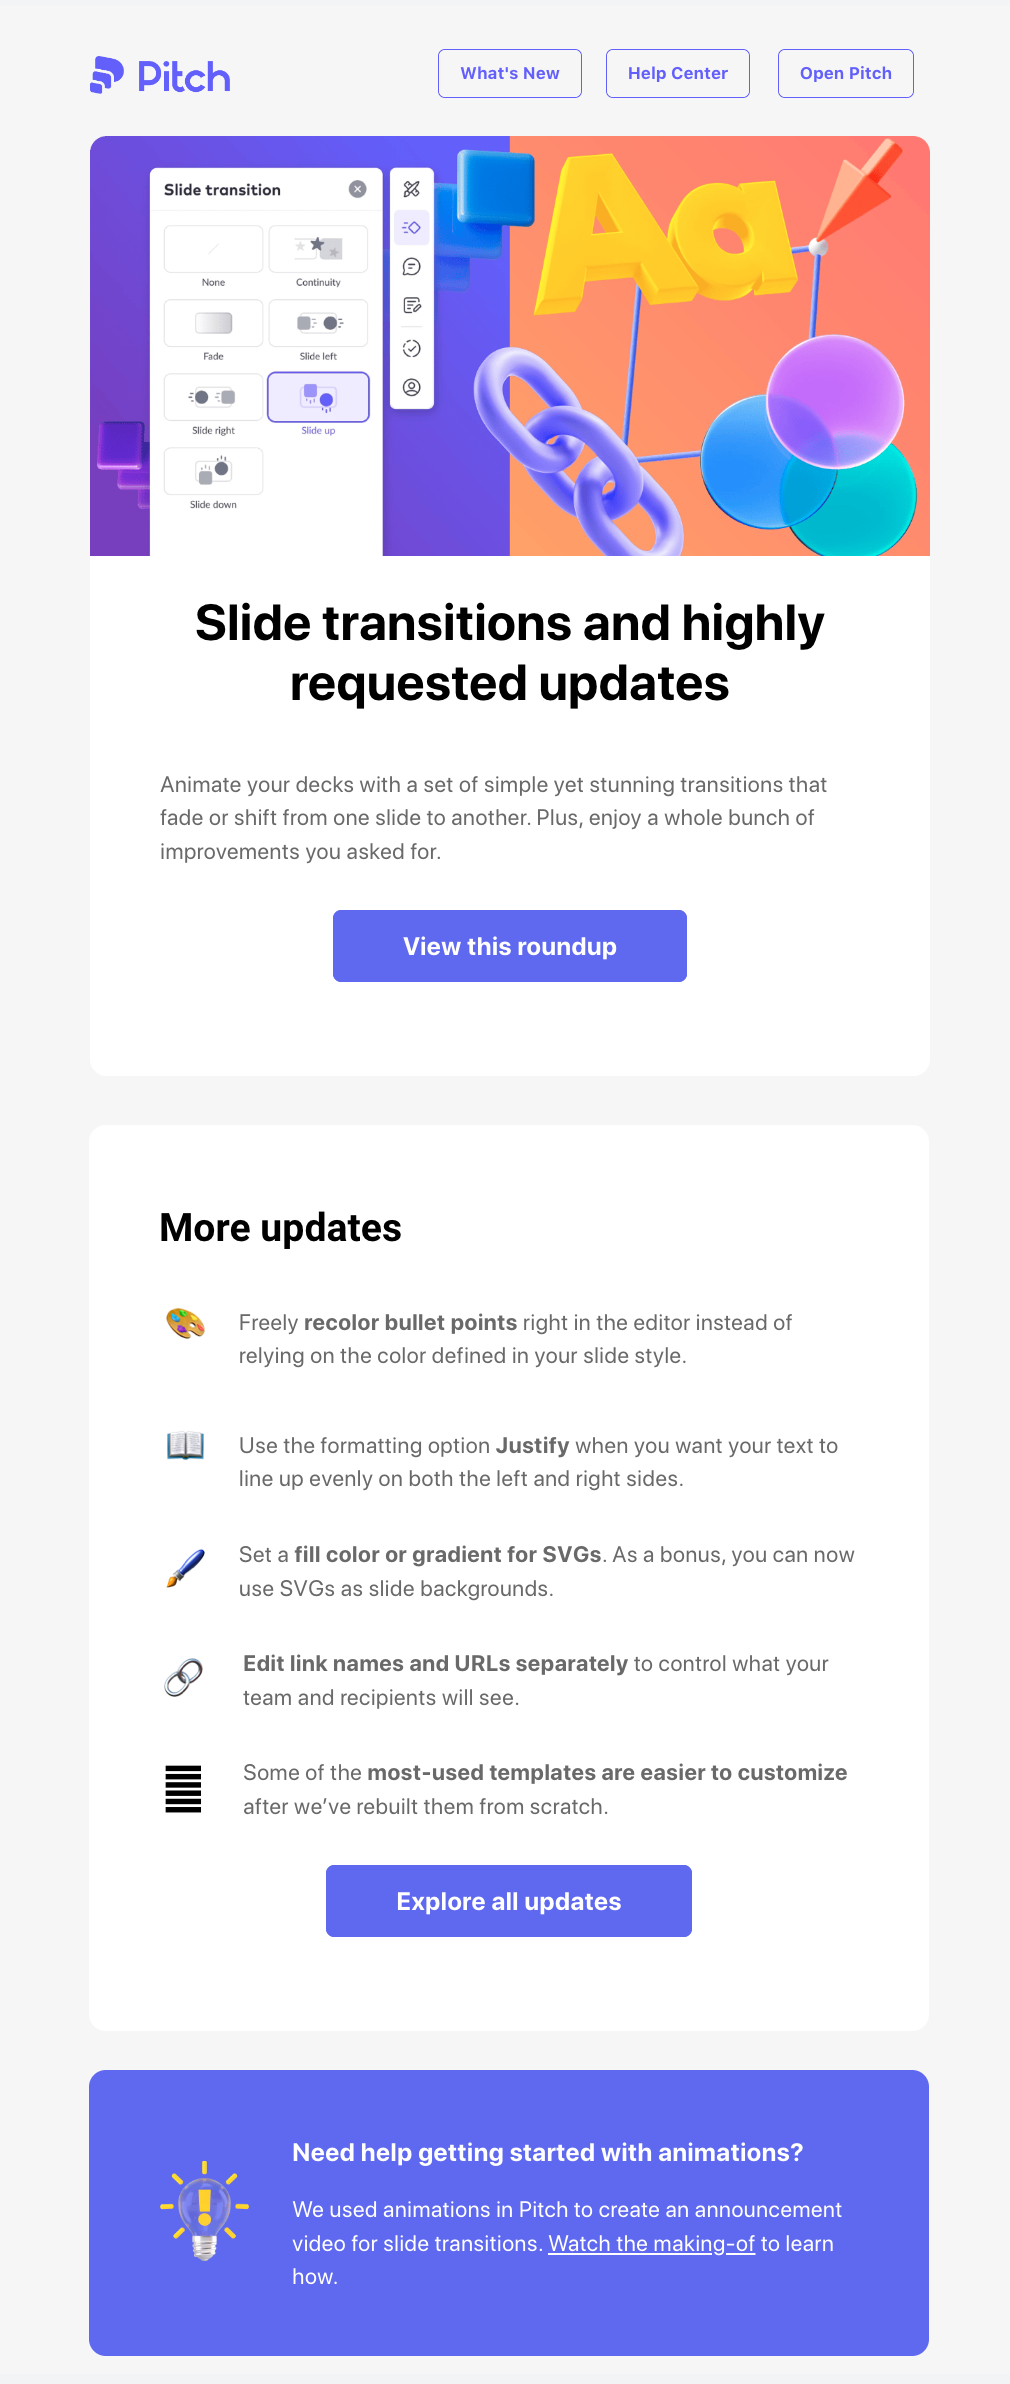 New Feature Announcement Emails: Screenshot of Pitch's feature roundup email